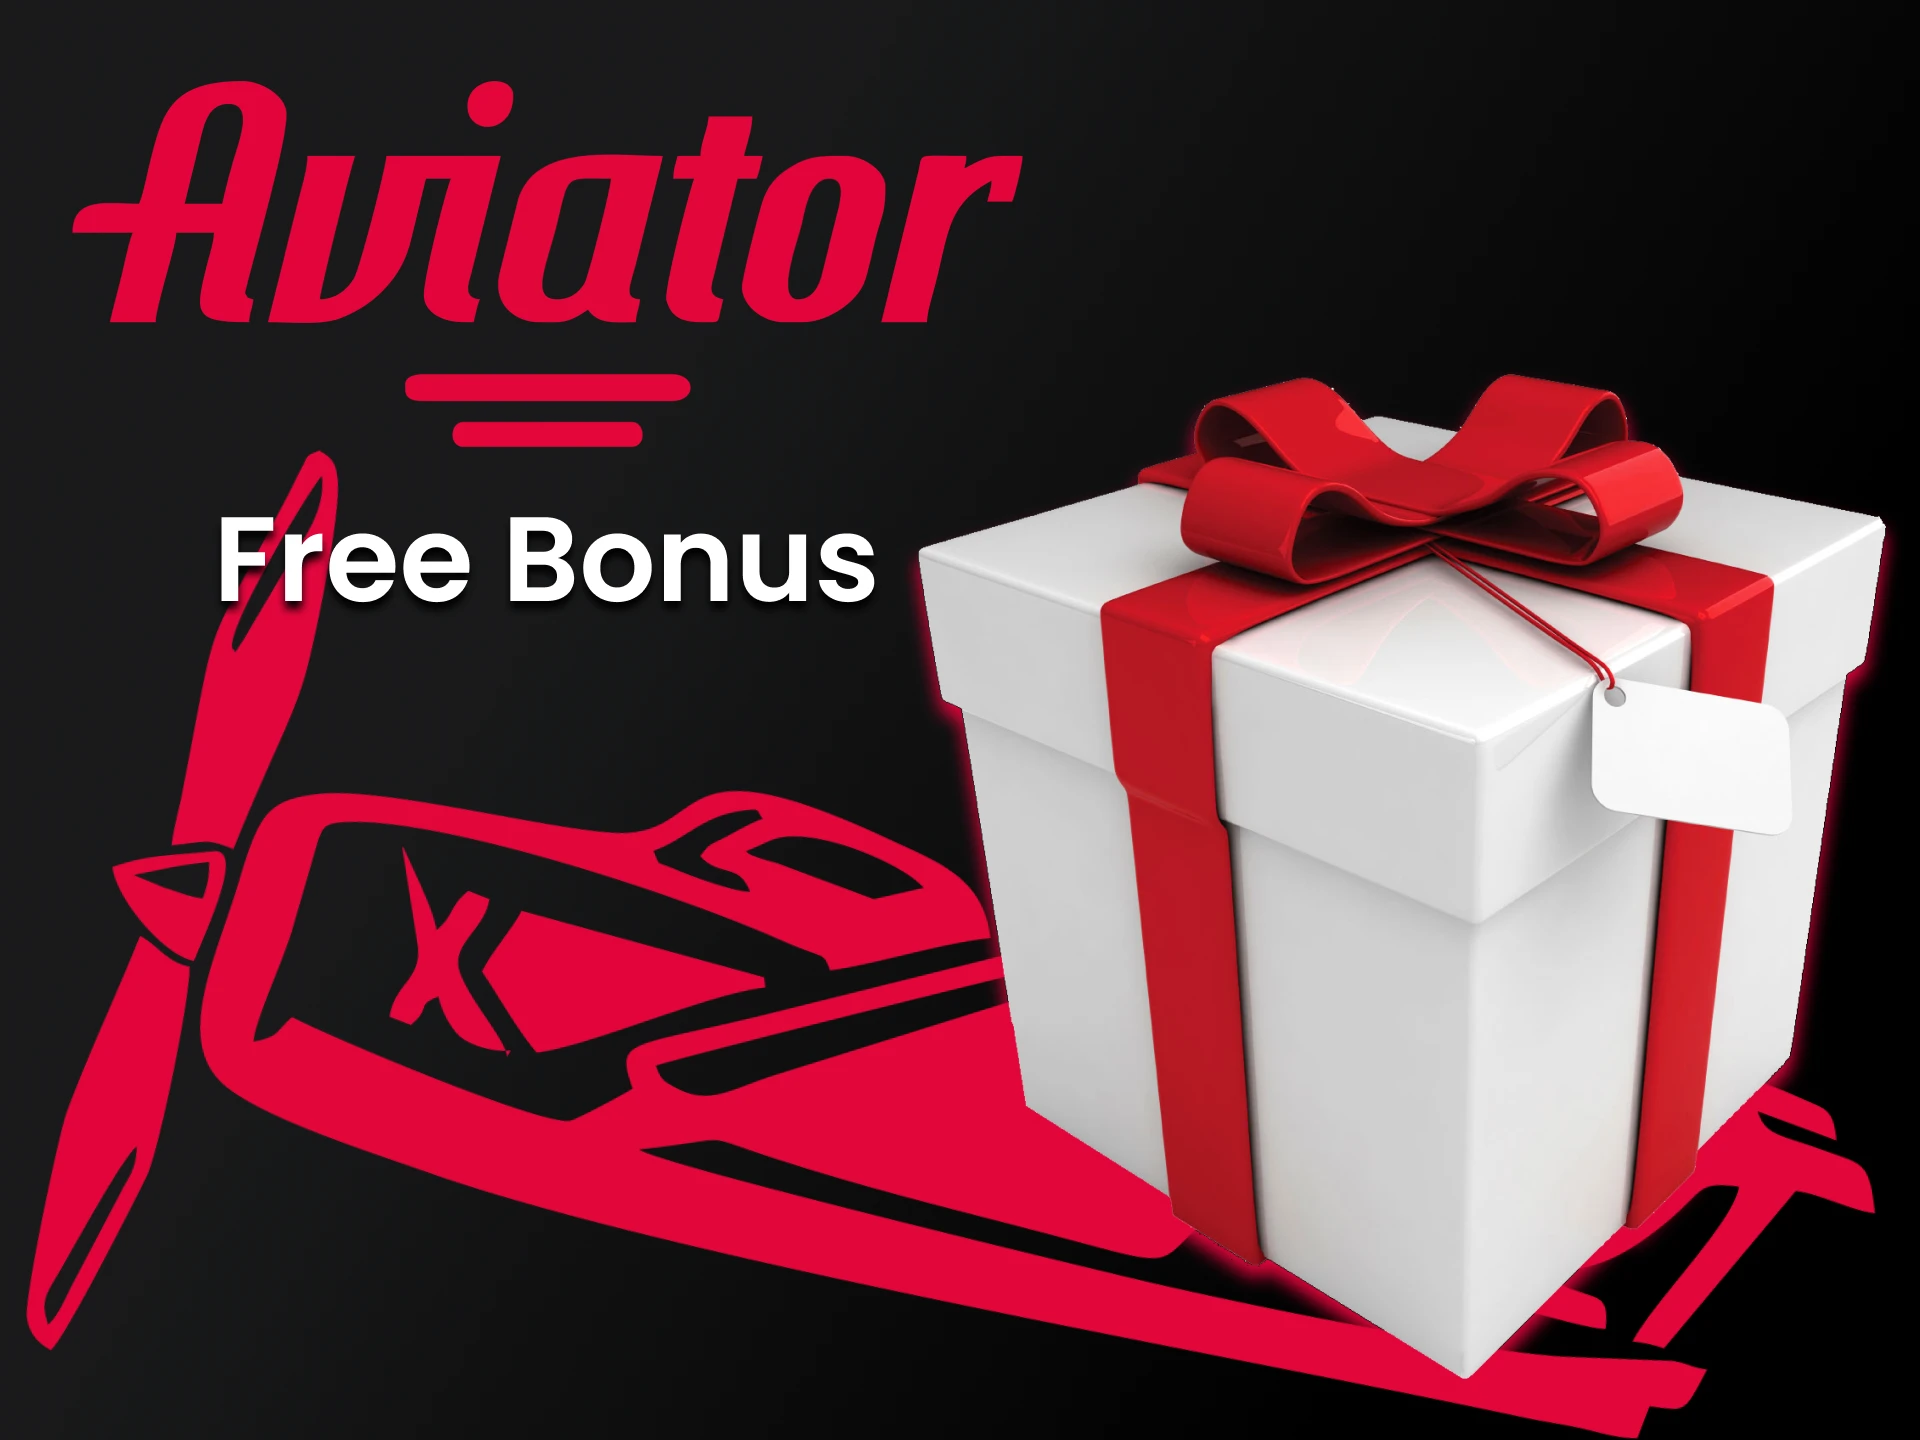 There are many bonuses that will help in the game Aviator.